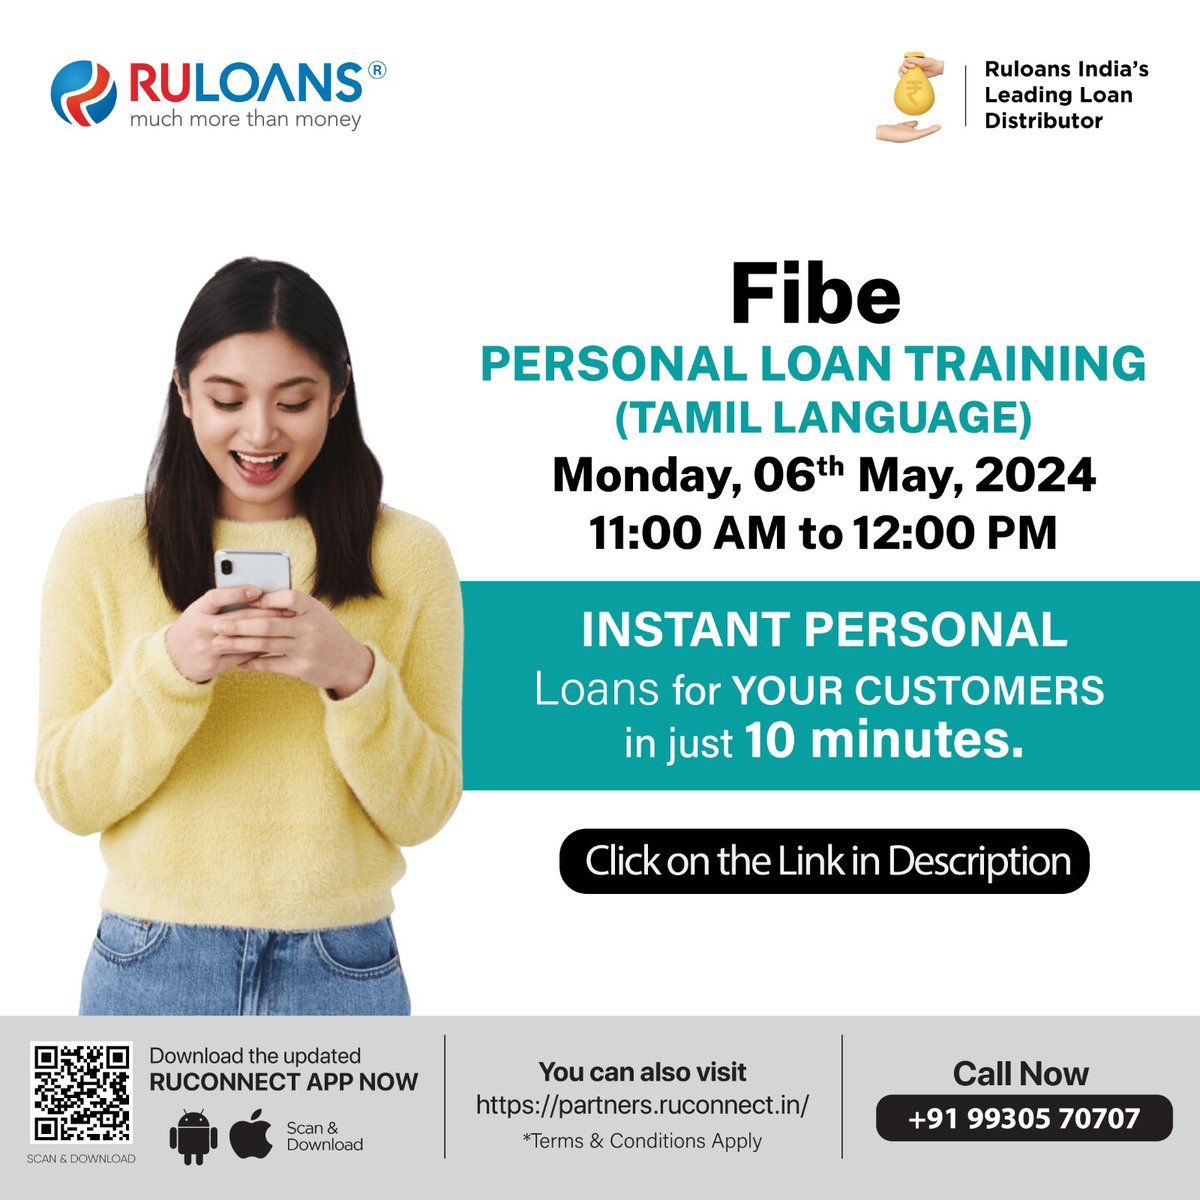 Fibe Personal Loan Training Pan India in TAMIL Language on 6th May, 2024

Time - 11:00 AM - 12:00 PM

Meeting Link - tinyurl.com/4rf32jvk

Limited Seats!

#personalloans #personalloan #fibe #loan #ruloan #trainingprogram #tamilnadu